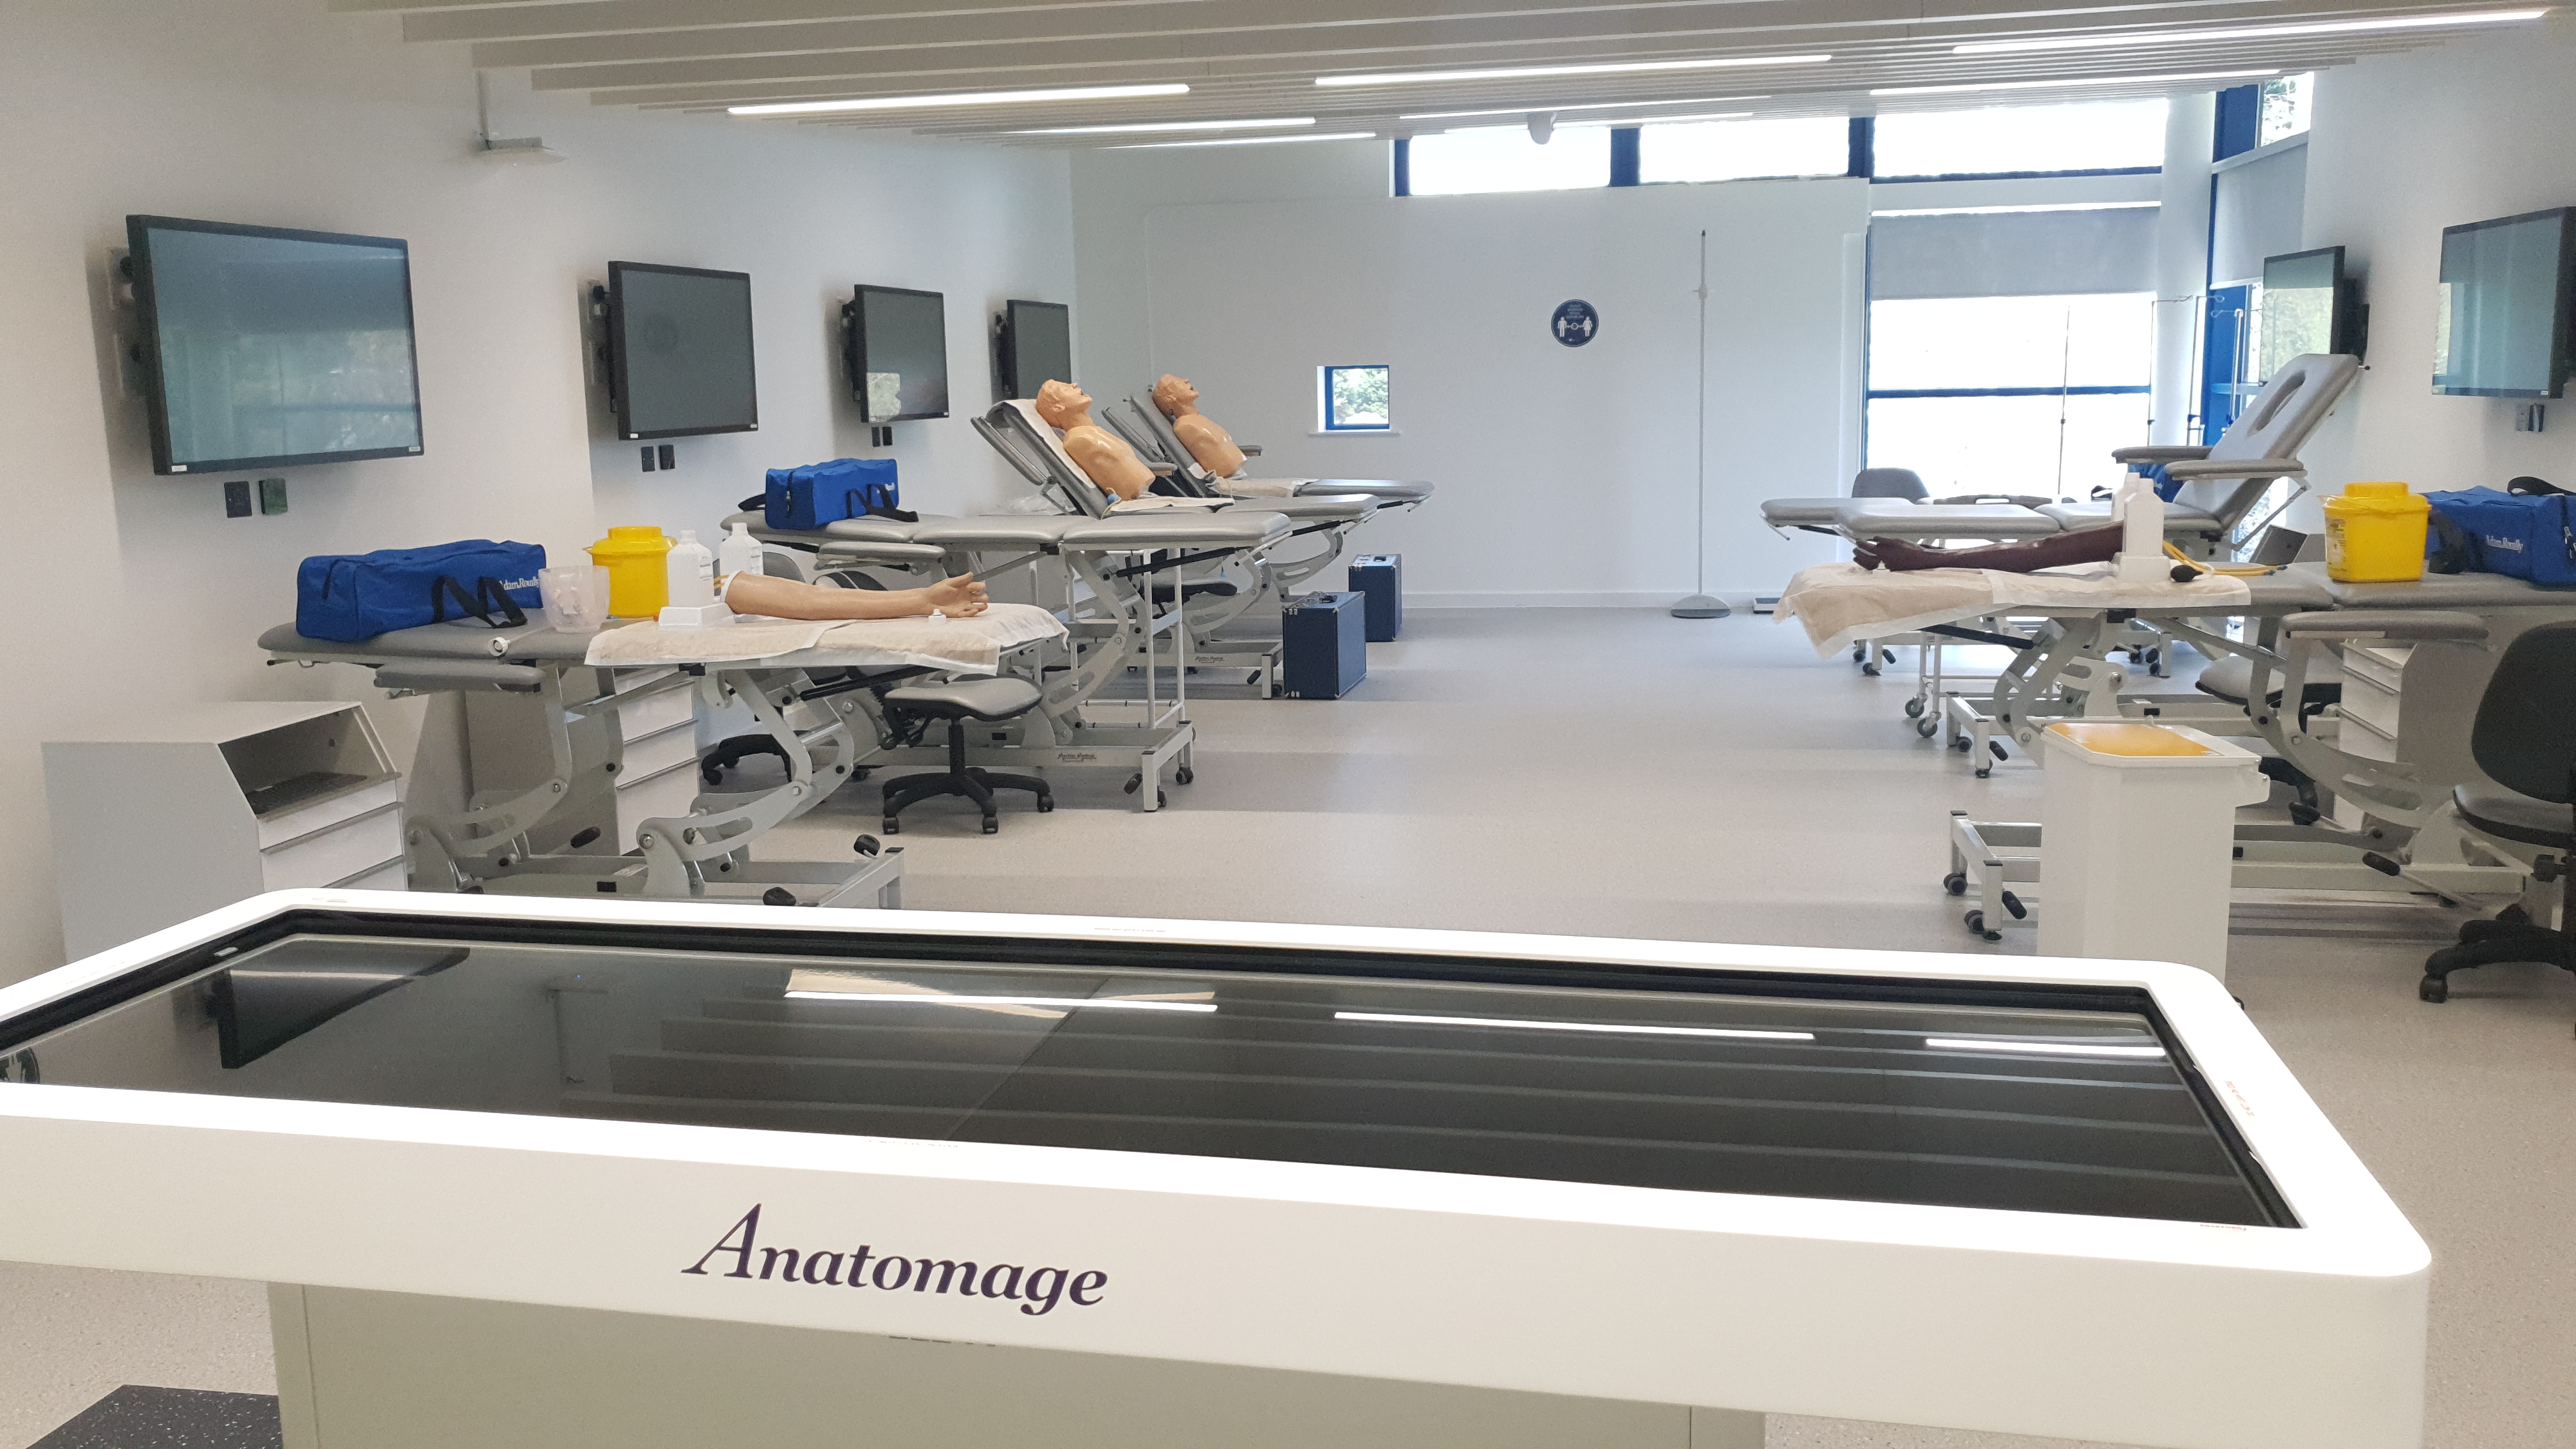 Specialist medical training room featuring Anatomage Dissection Table